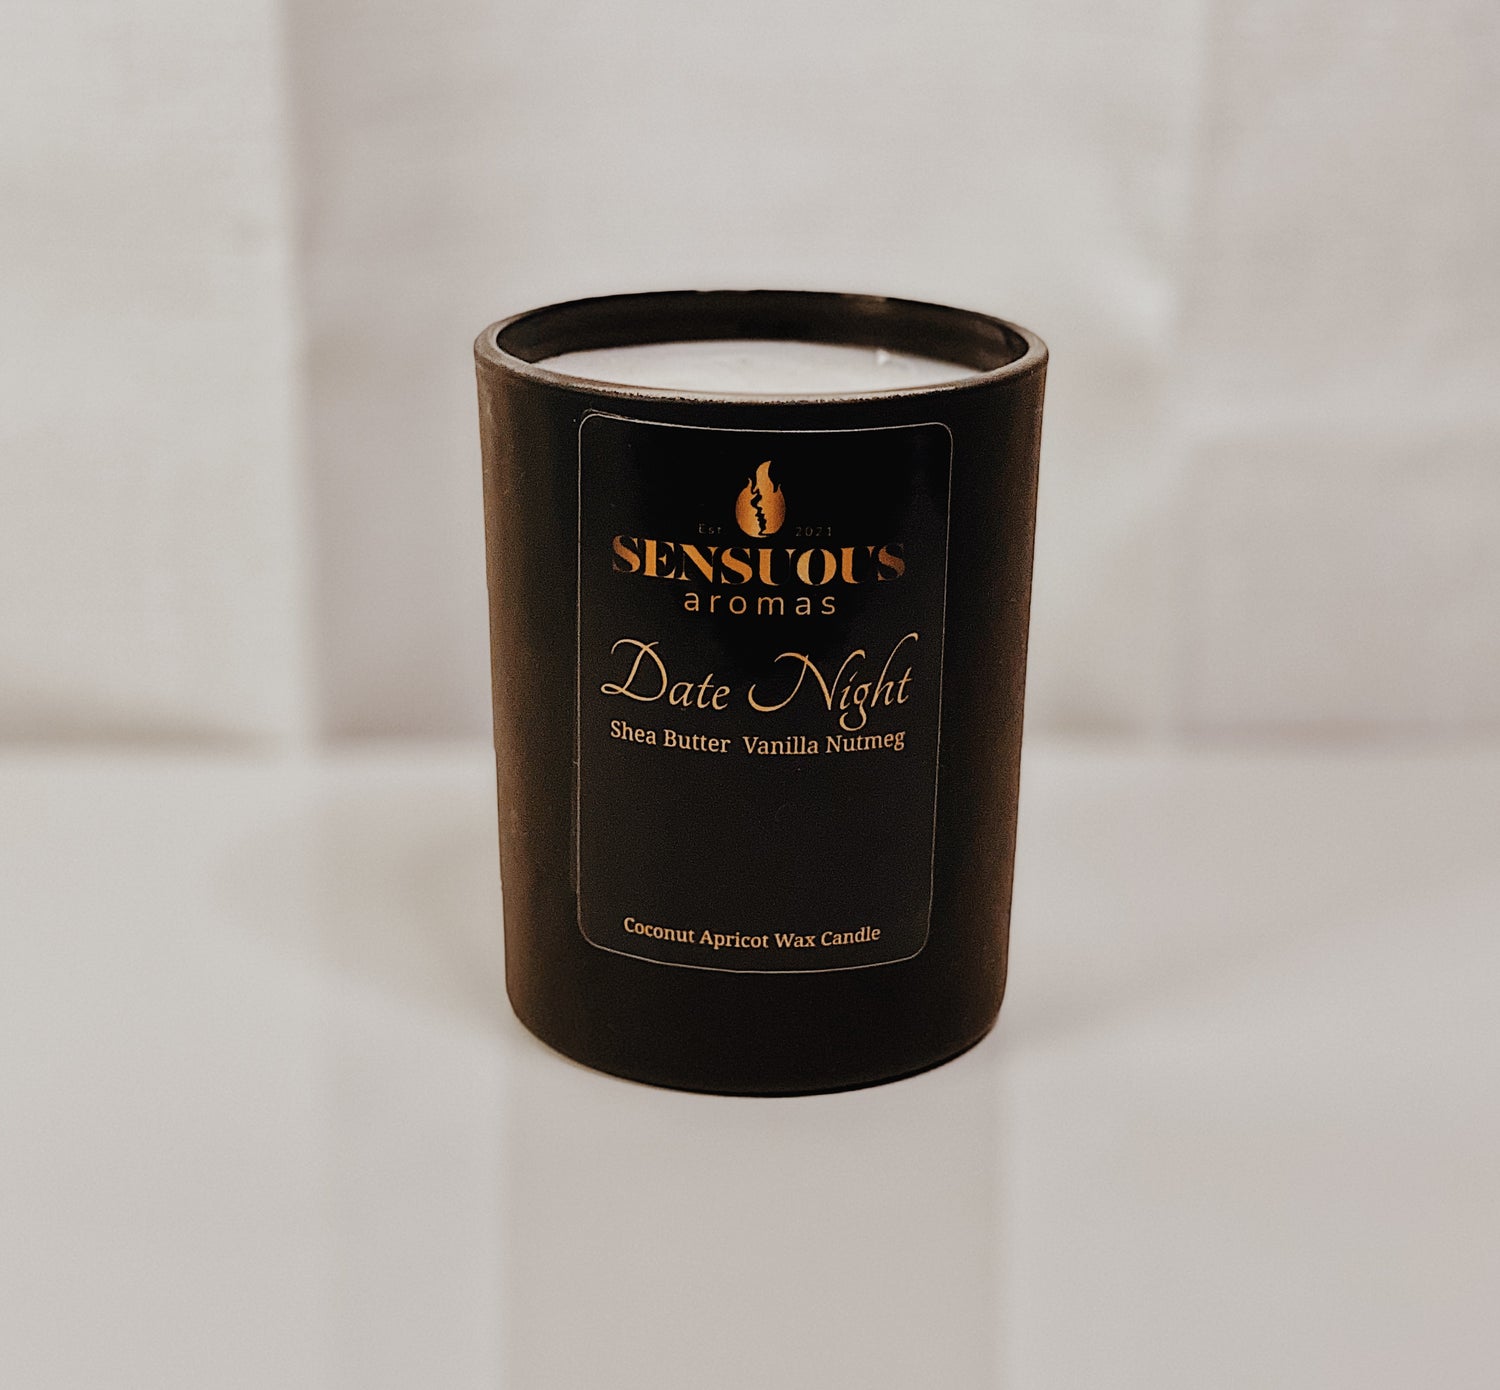 Cocount wax wooden wick candle vanilla, shea butter and juicy orange scent notes